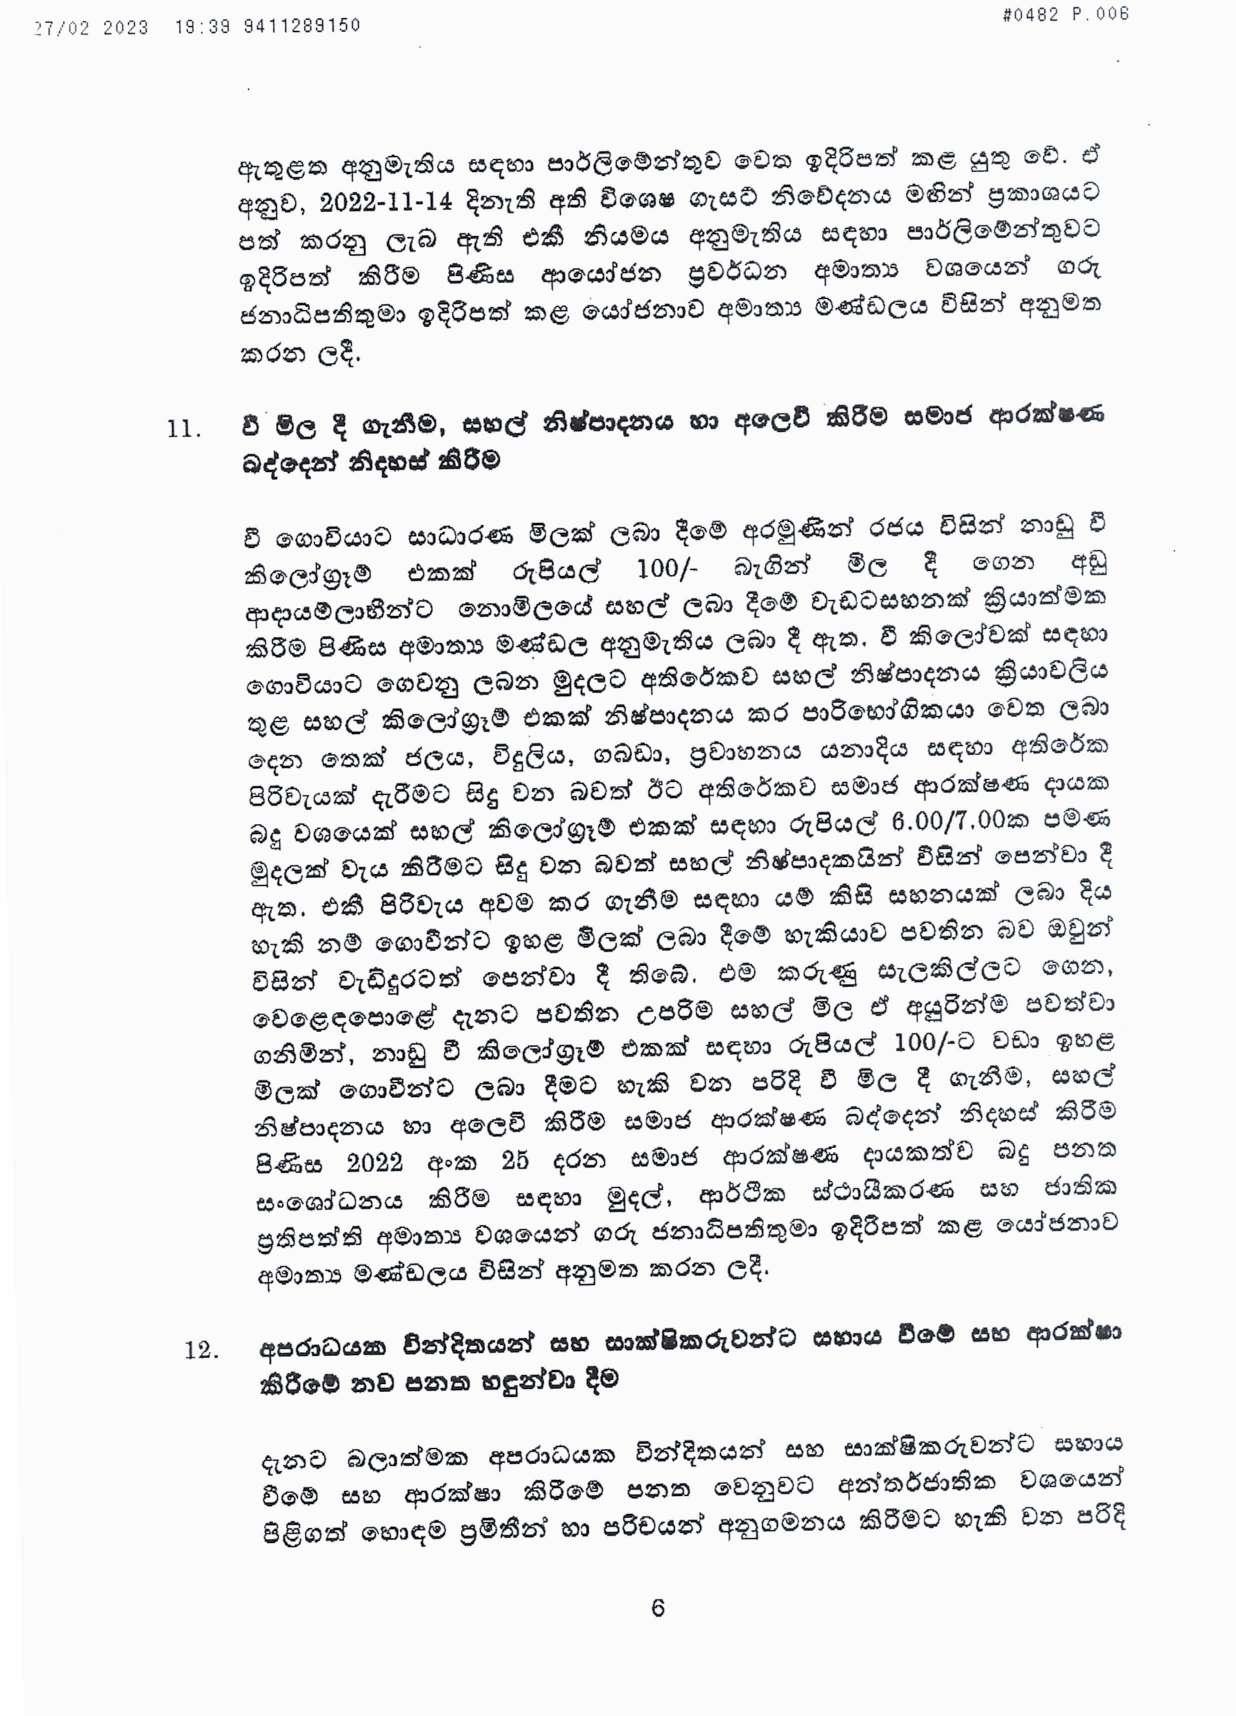 Cabinet Decision on 27.07.2023 page 006